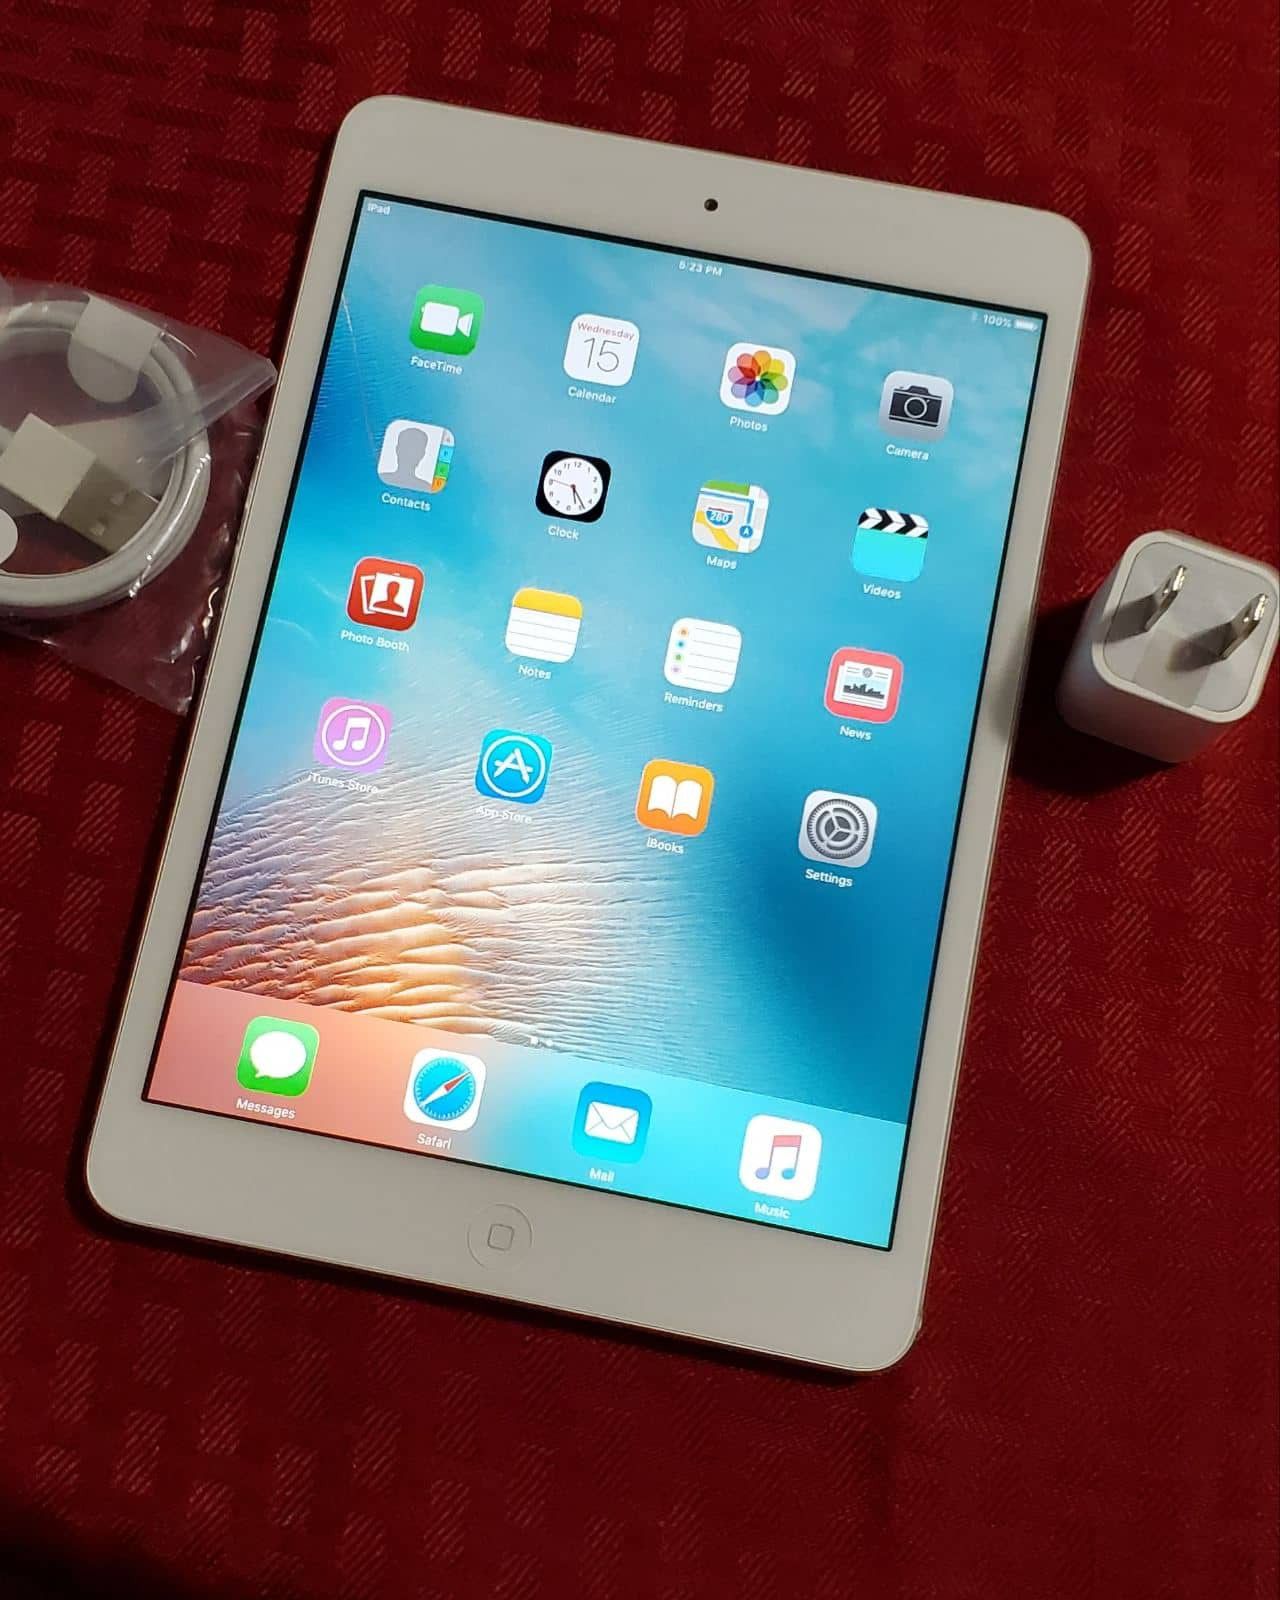 iPad Mini 1 | 1st Generation | Wi-Fi Internet access | 7 inch iPad | Usable with Wi-Fi ONLY